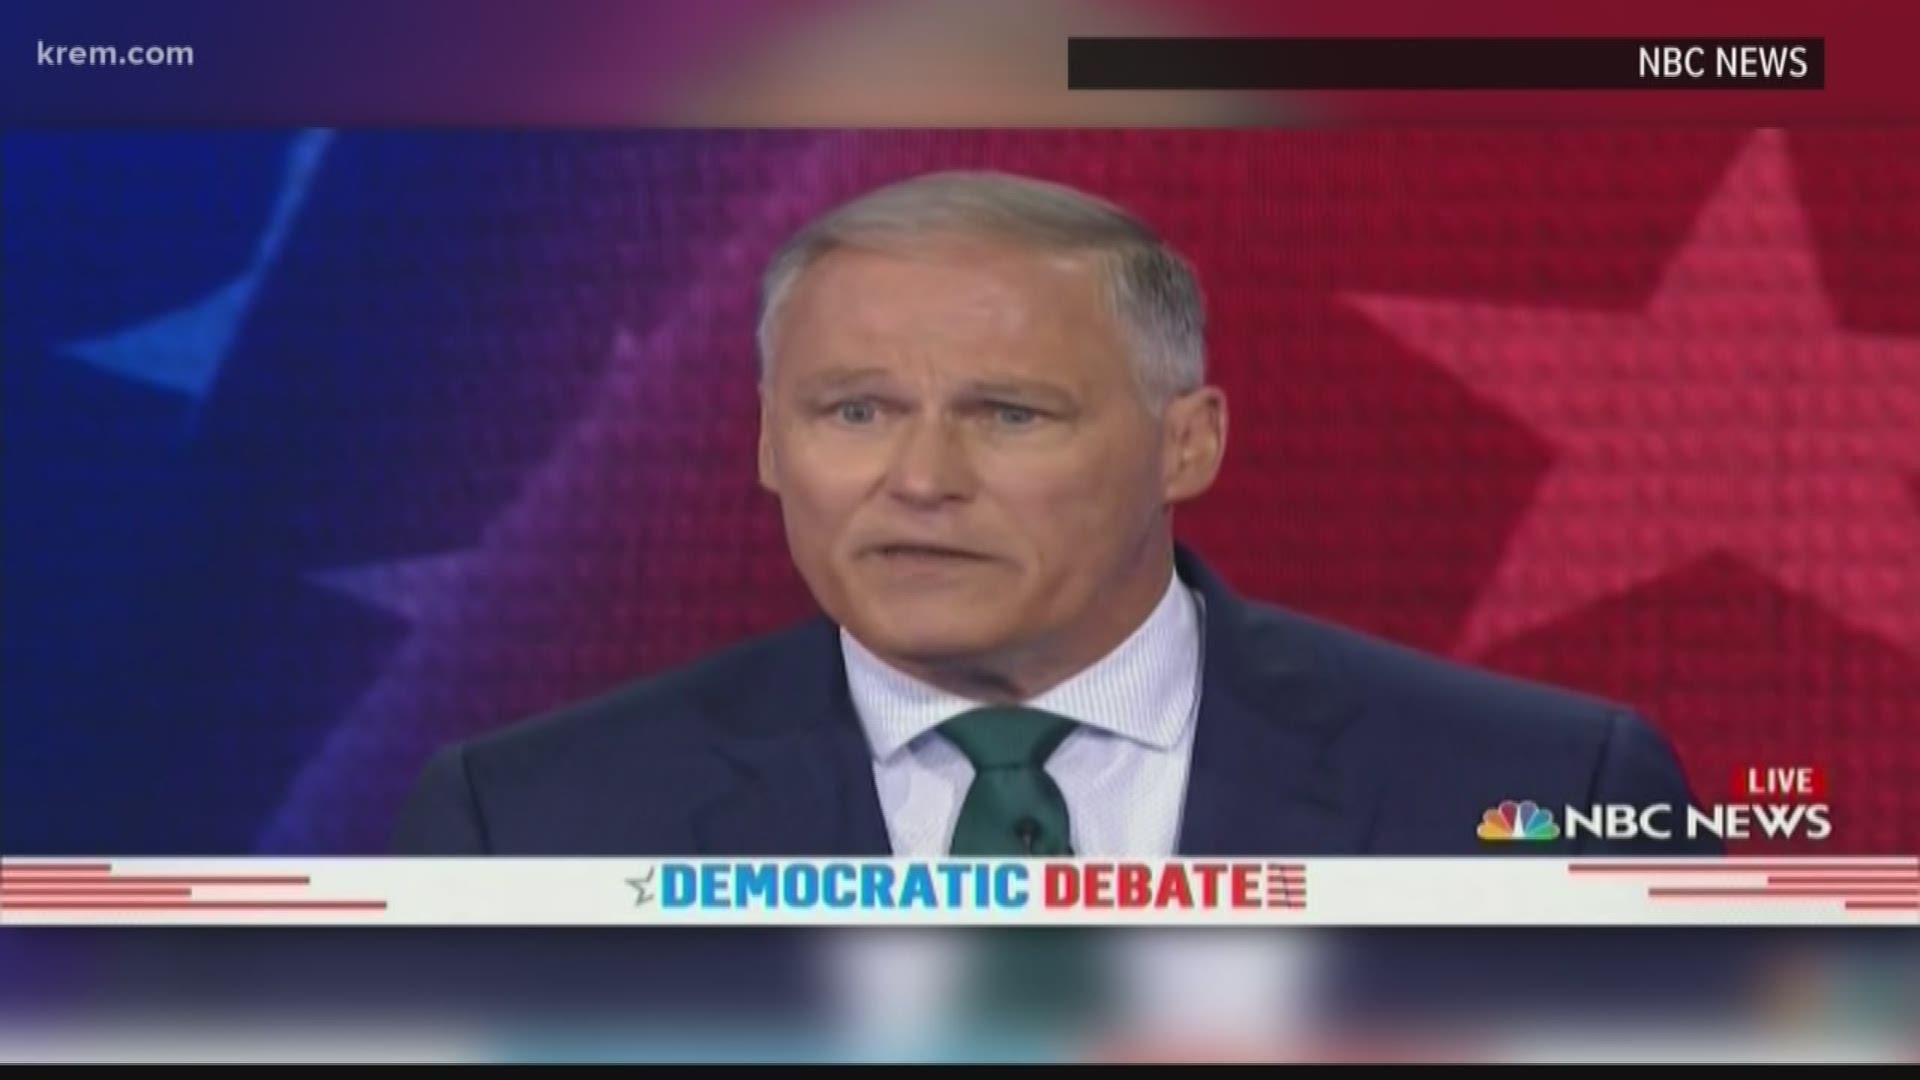 Washington Gov. Jay Inslee was one of ten candidates on the stage vying for the Democratic presidential nomination.